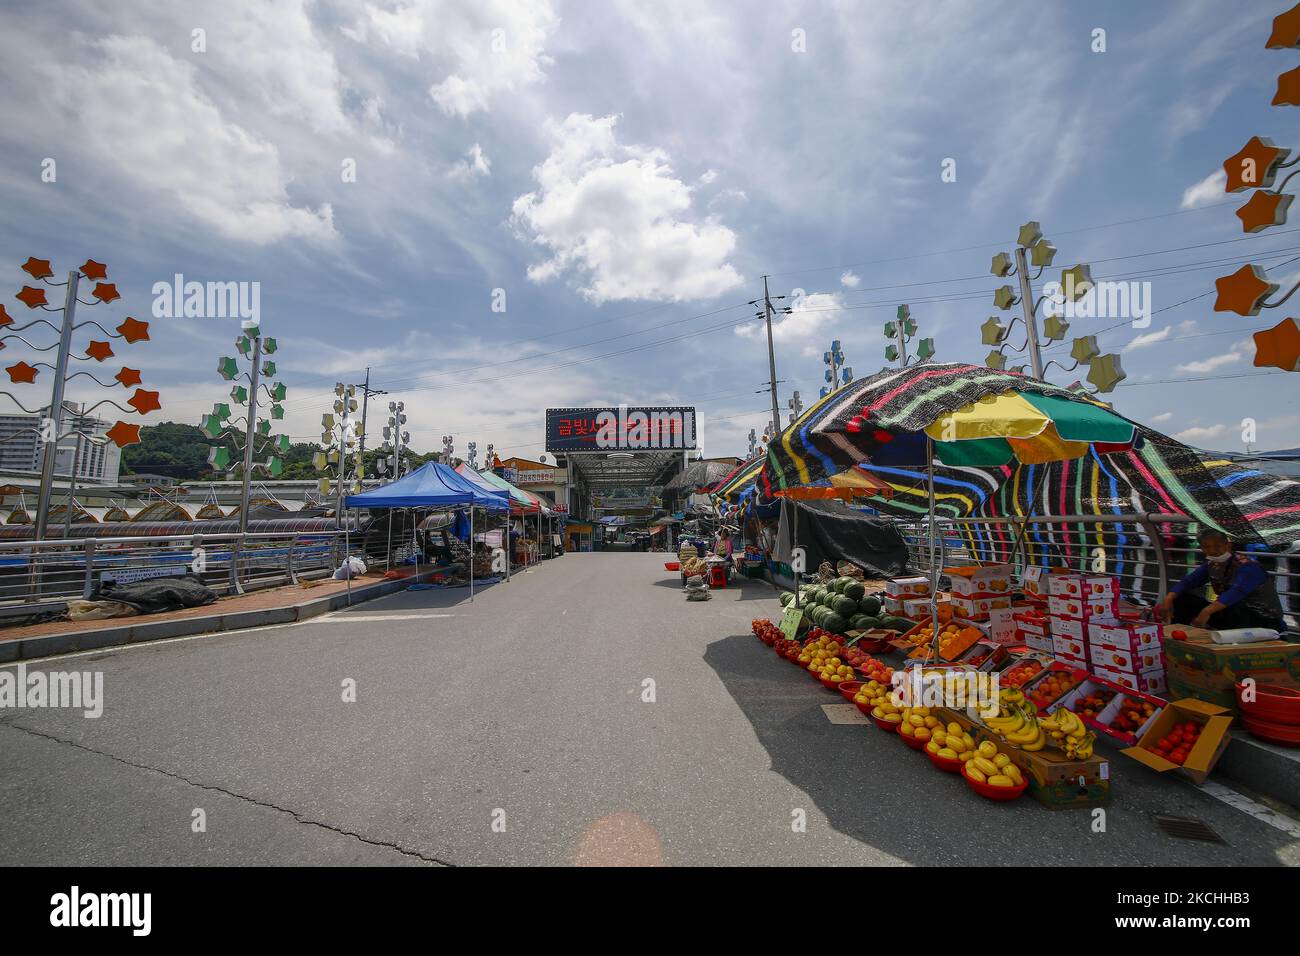 A View of empty marketplace street at Geumbit market in Geumsan Gun, South Korea on July 22, 2021. South Korea's daily new coronavirus cases hit a fresh high of over 1,800 on Thursday with mass infections from a virus-hit naval unit, while authorities are increasingly inclined to extend the toughest virus restrictions in the wider Seoul area amid no signs of a letup. (Photo by Seung-il Ryu/NurPhoto) Stock Photo